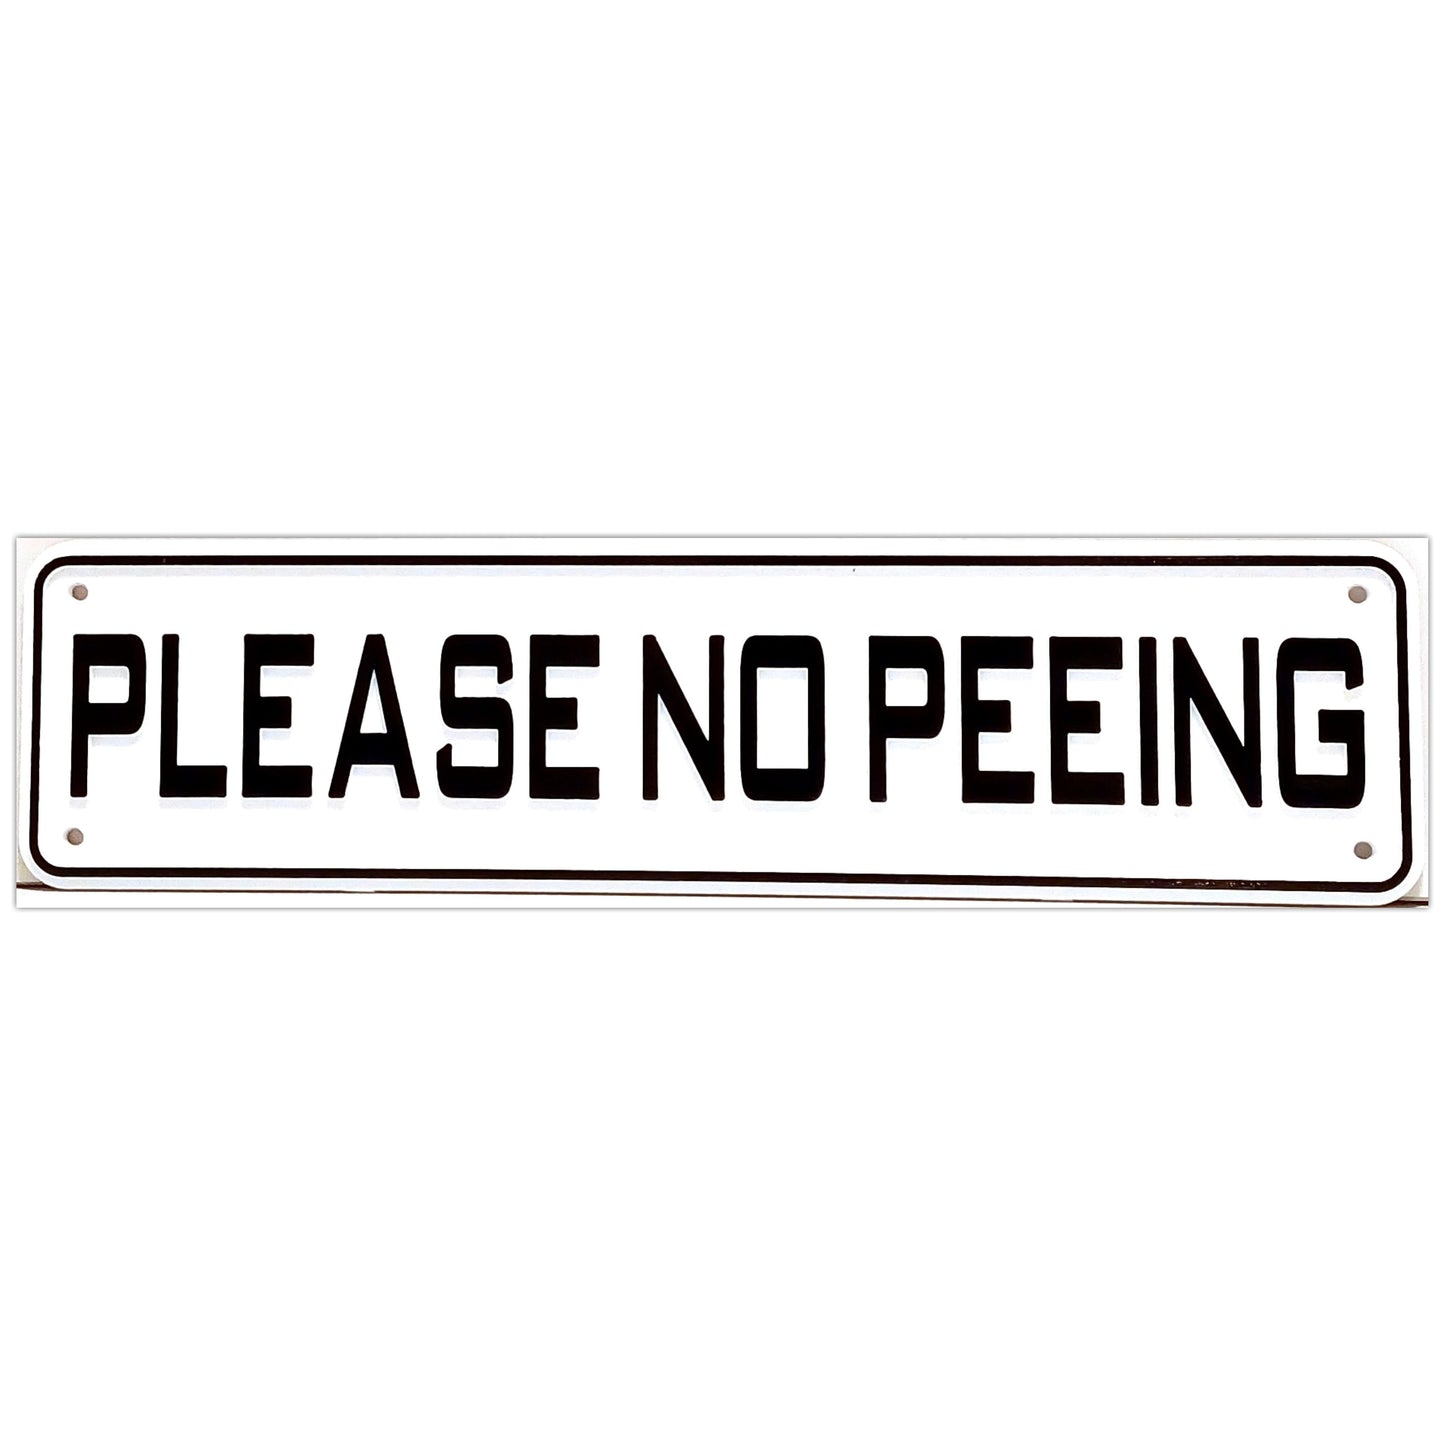 Please No Peeing Sign Solid Plastic 12 X 3